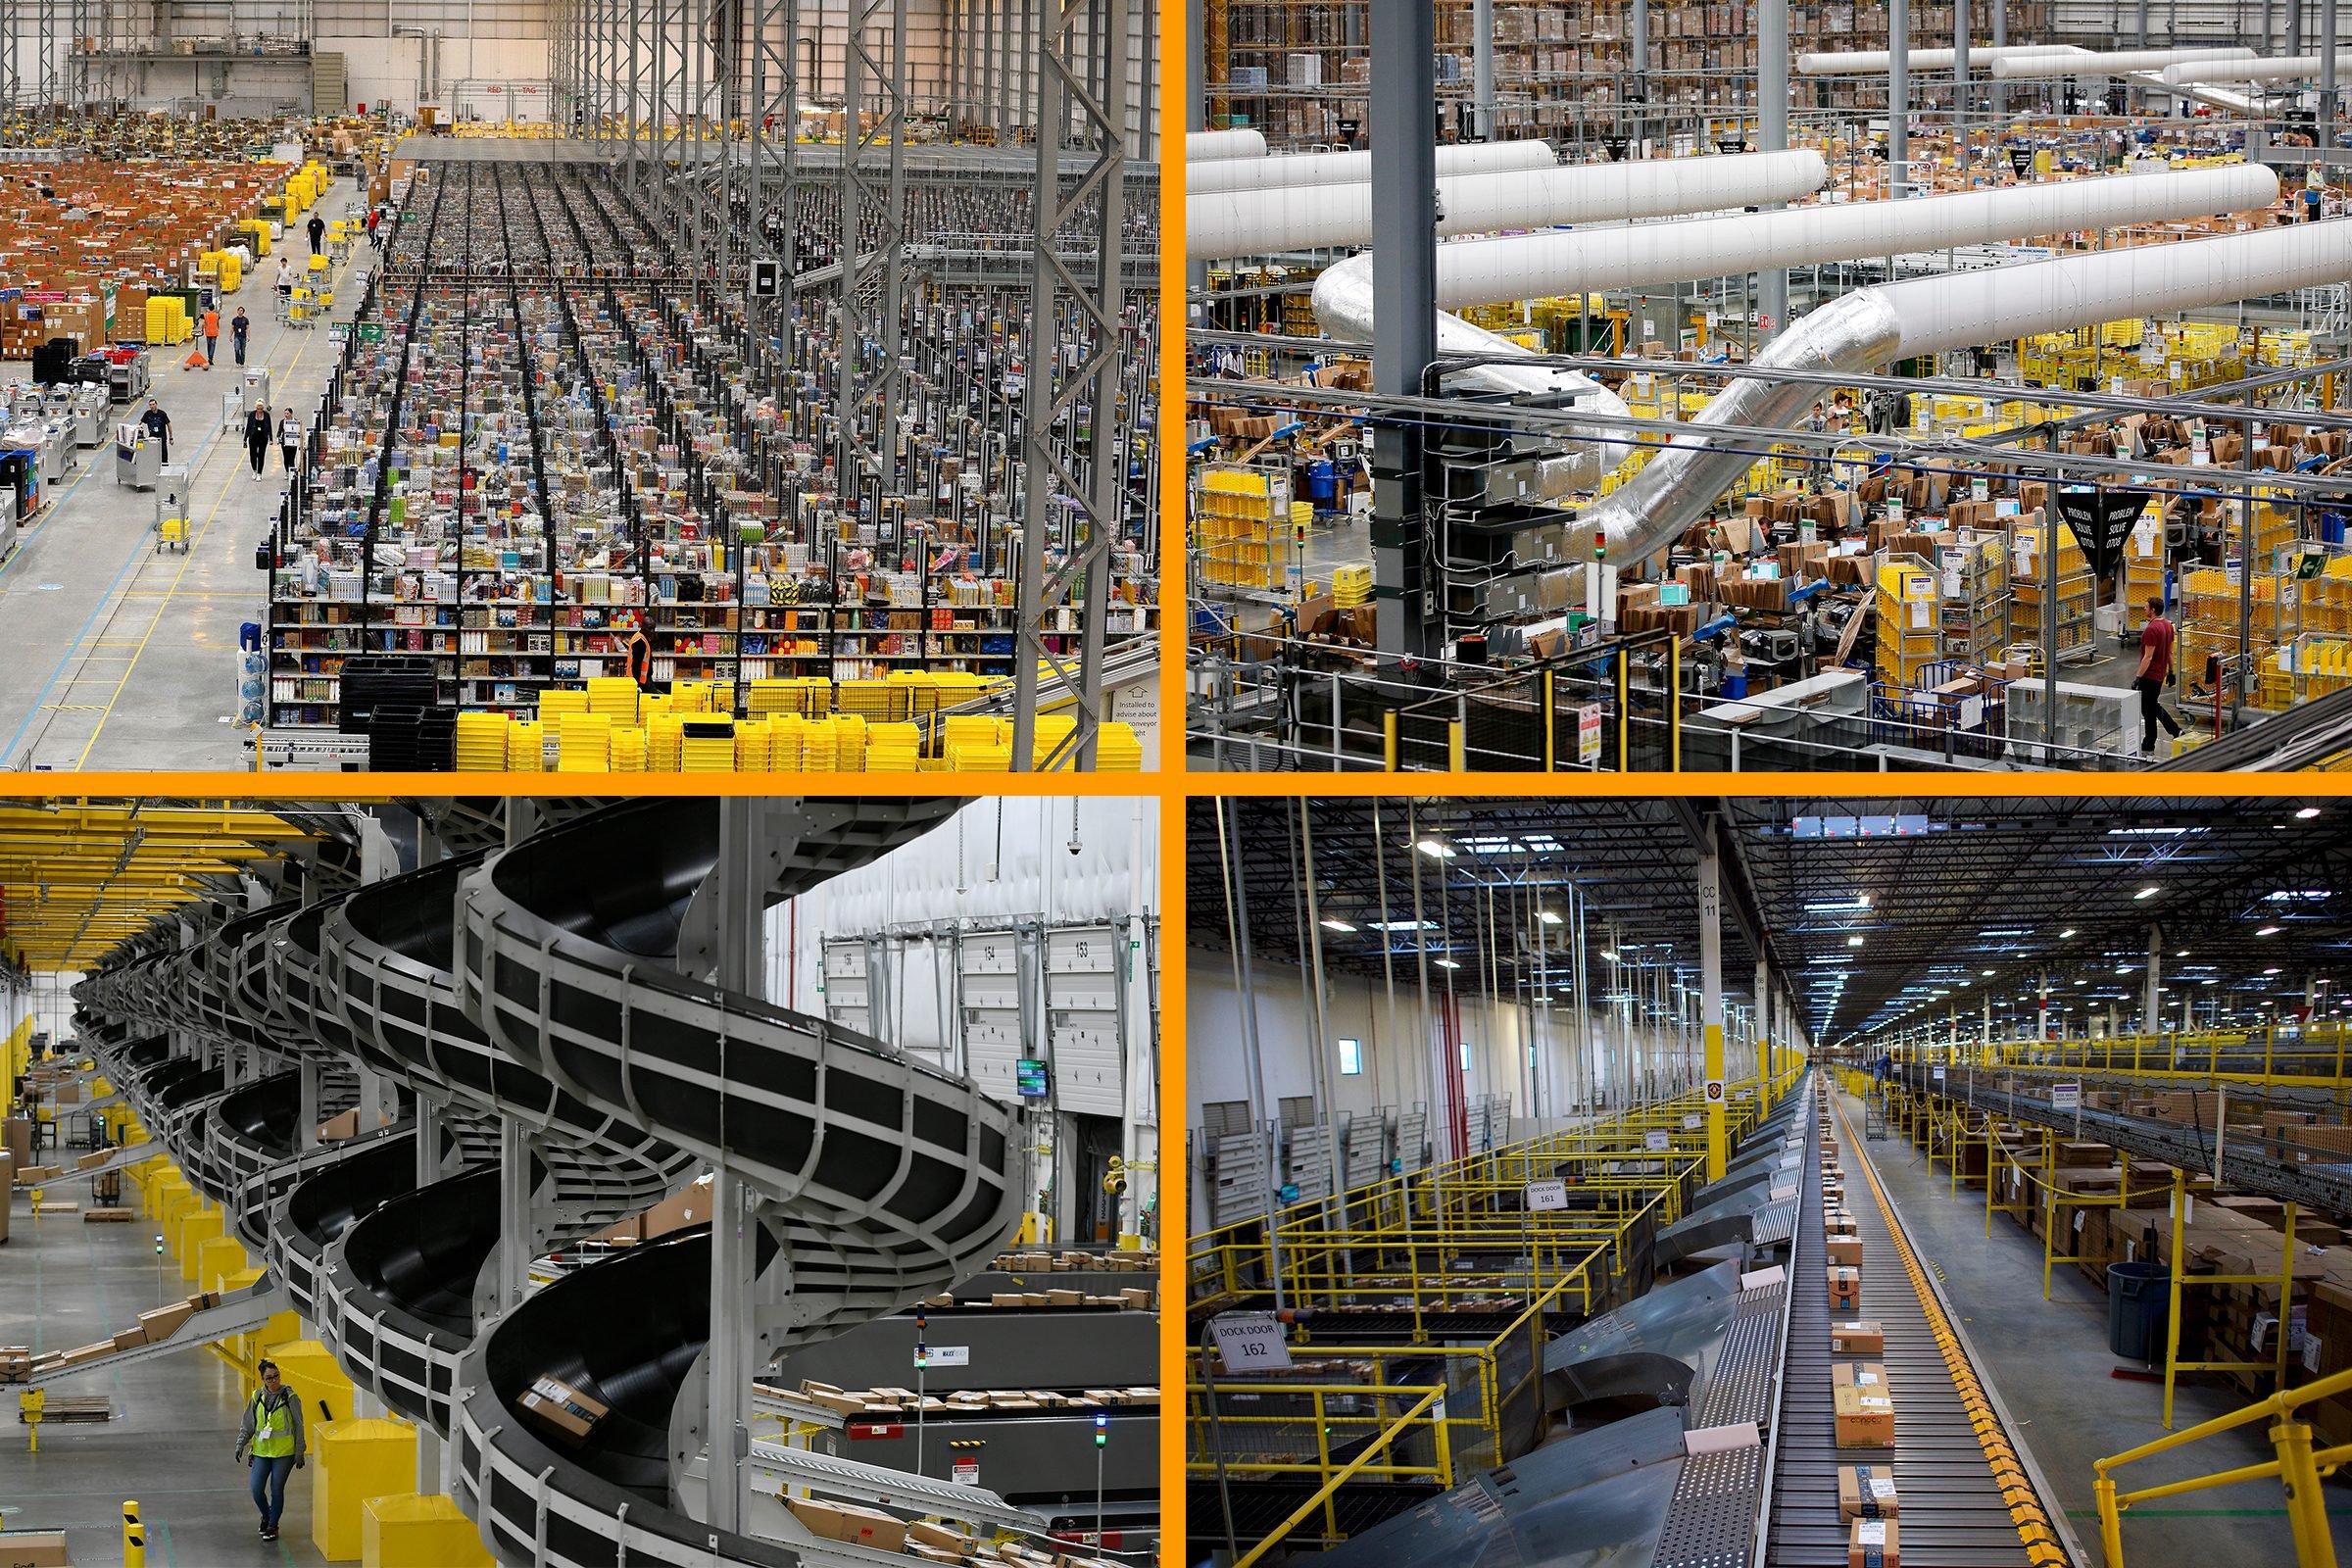 https://www.rd.com/wp-content/uploads/2021/07/amazon-fulfillment-centers-grid-collage.jpg